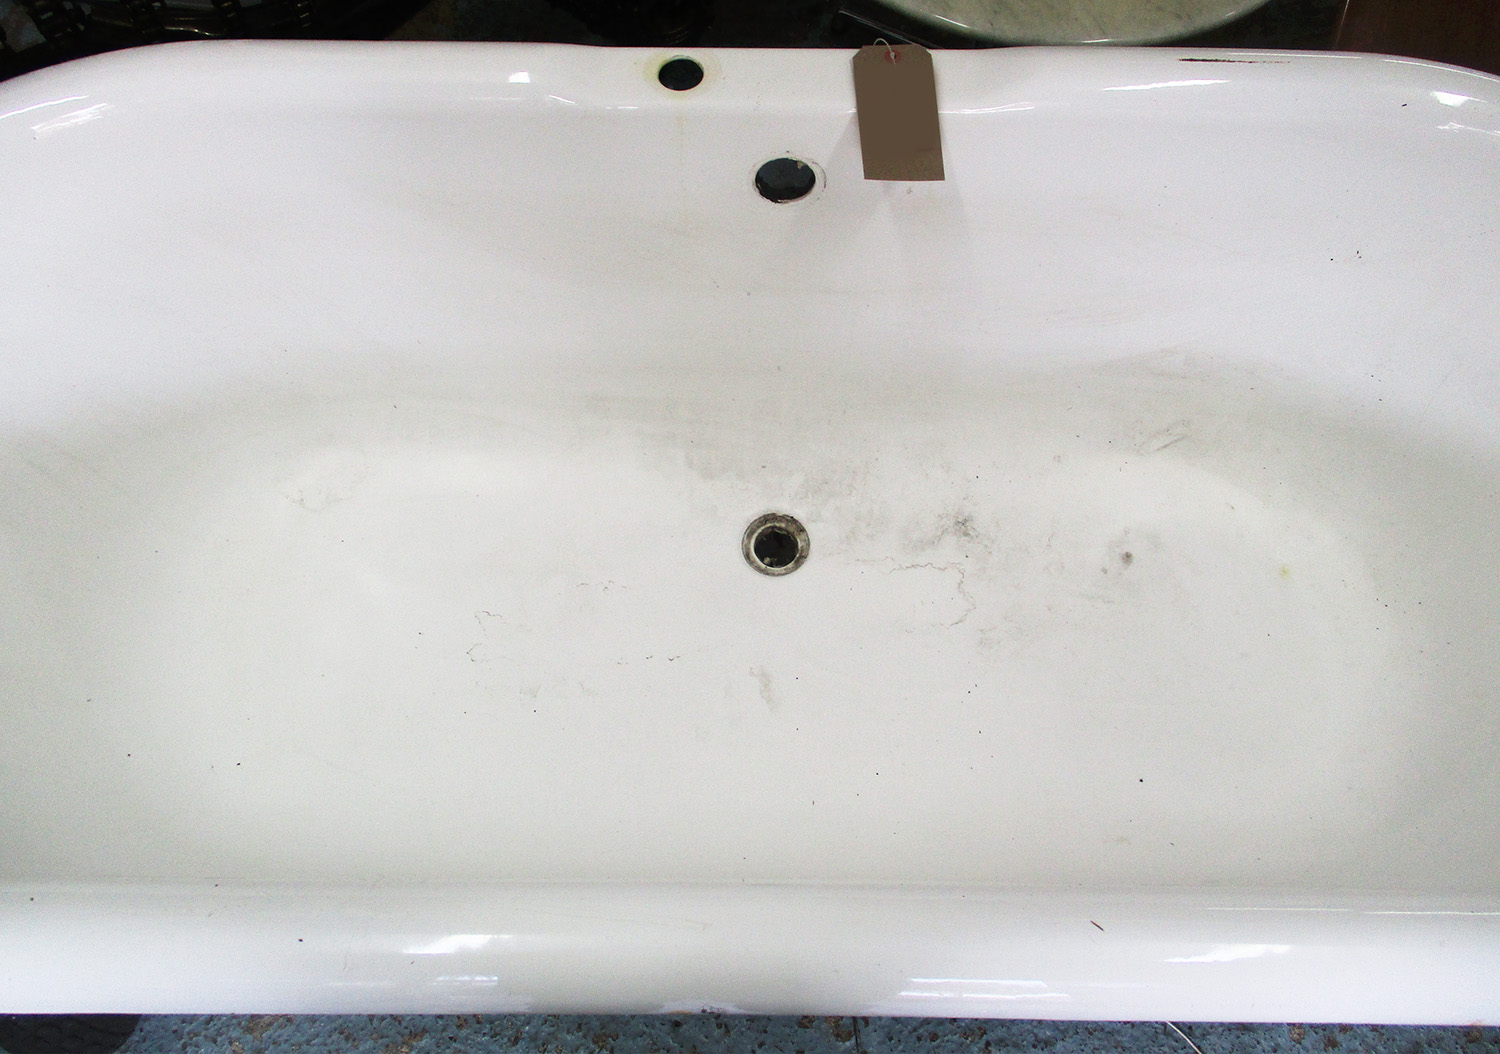 CAST IRON BATH, double ended traditional style on legs, 77cm x 62cm H x 170cm L. - Image 4 of 4